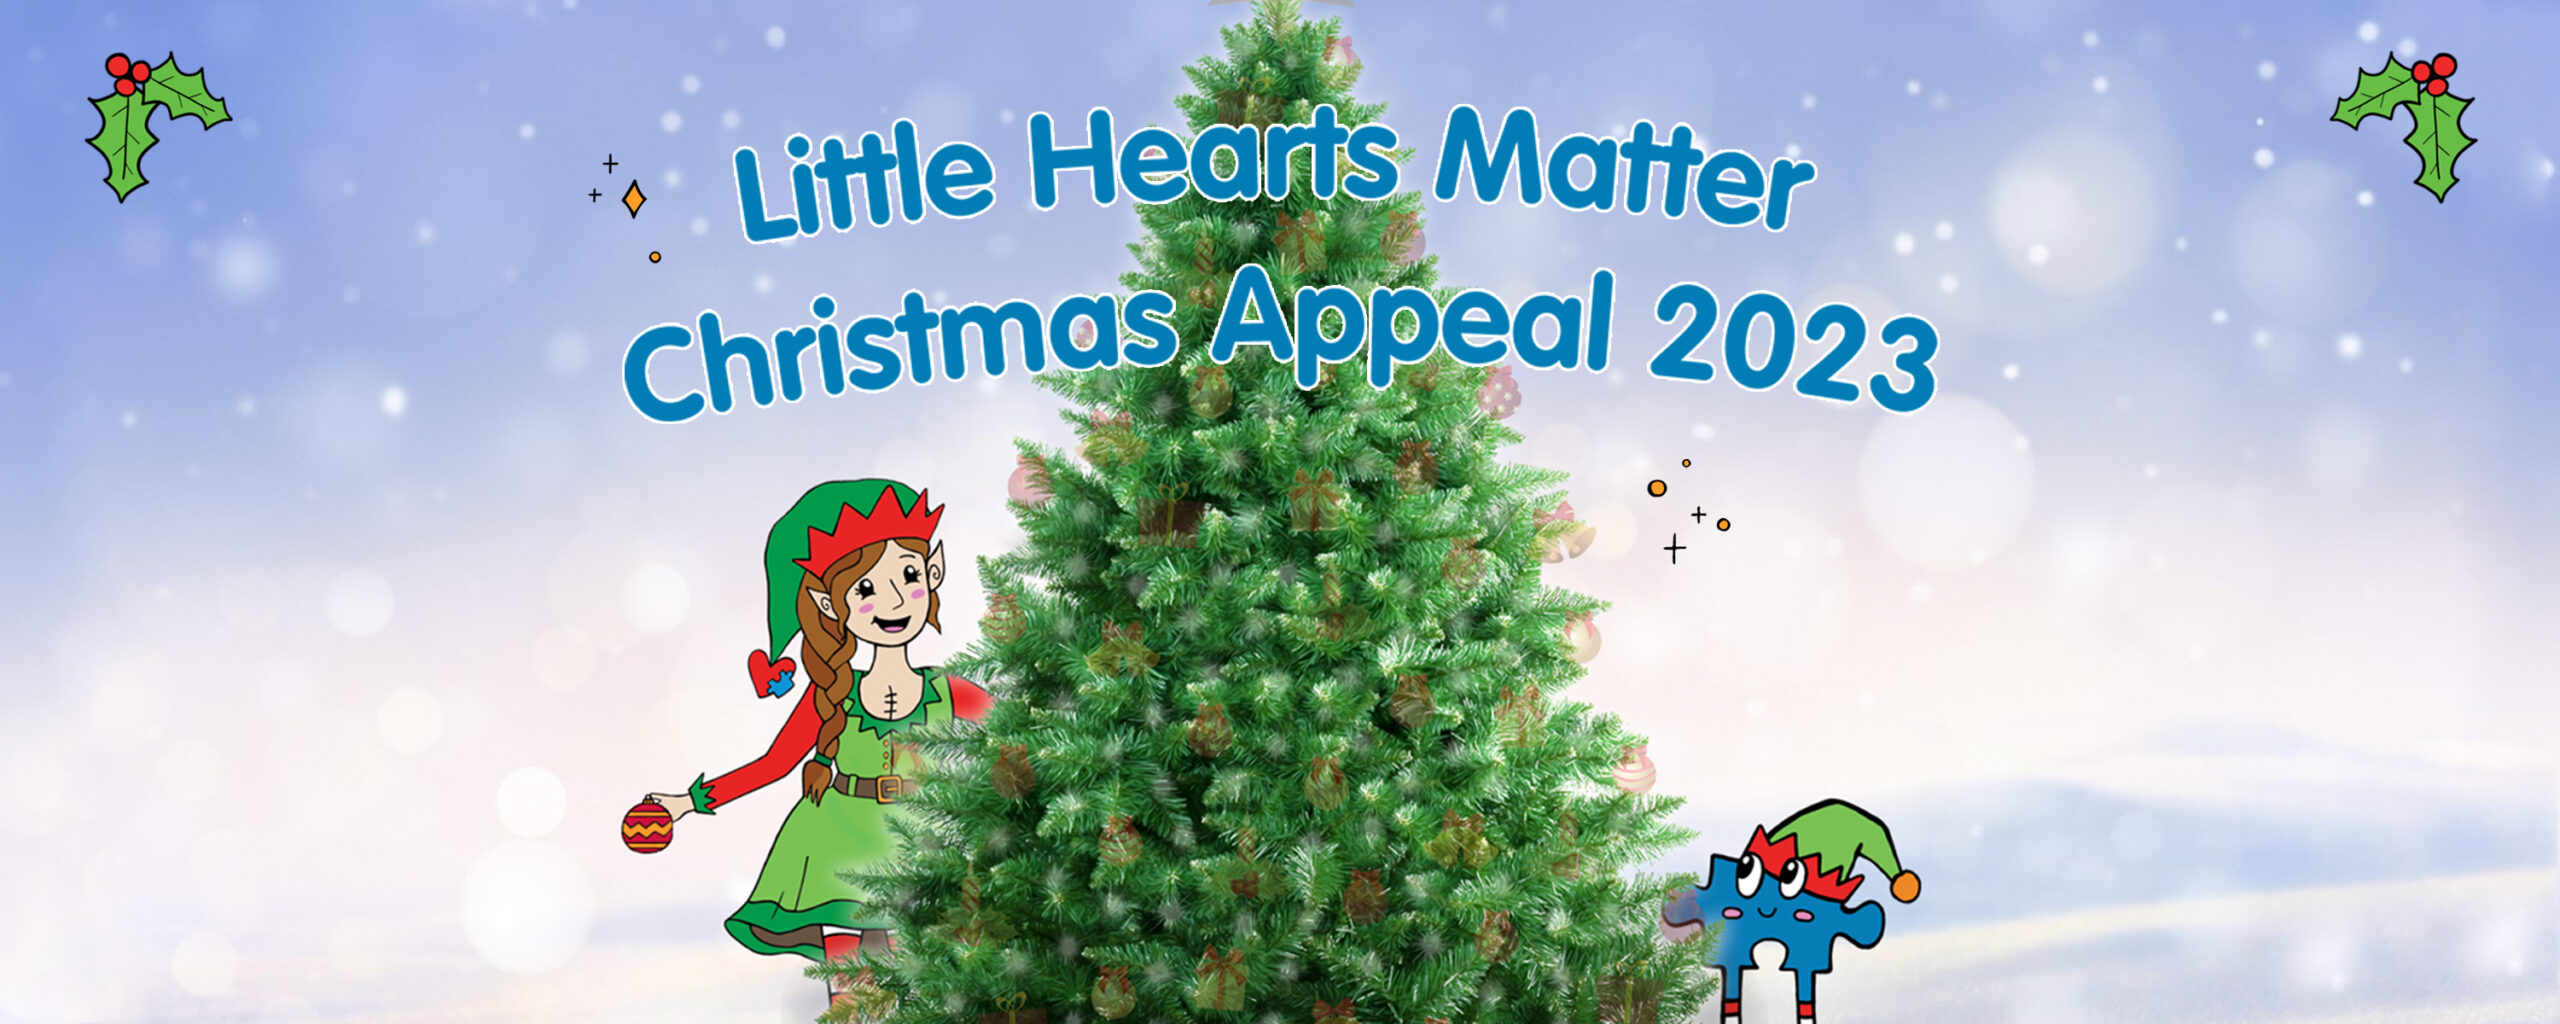 Little Hearts Matter Launches Christmas Appeal to Support Crucial Helpline